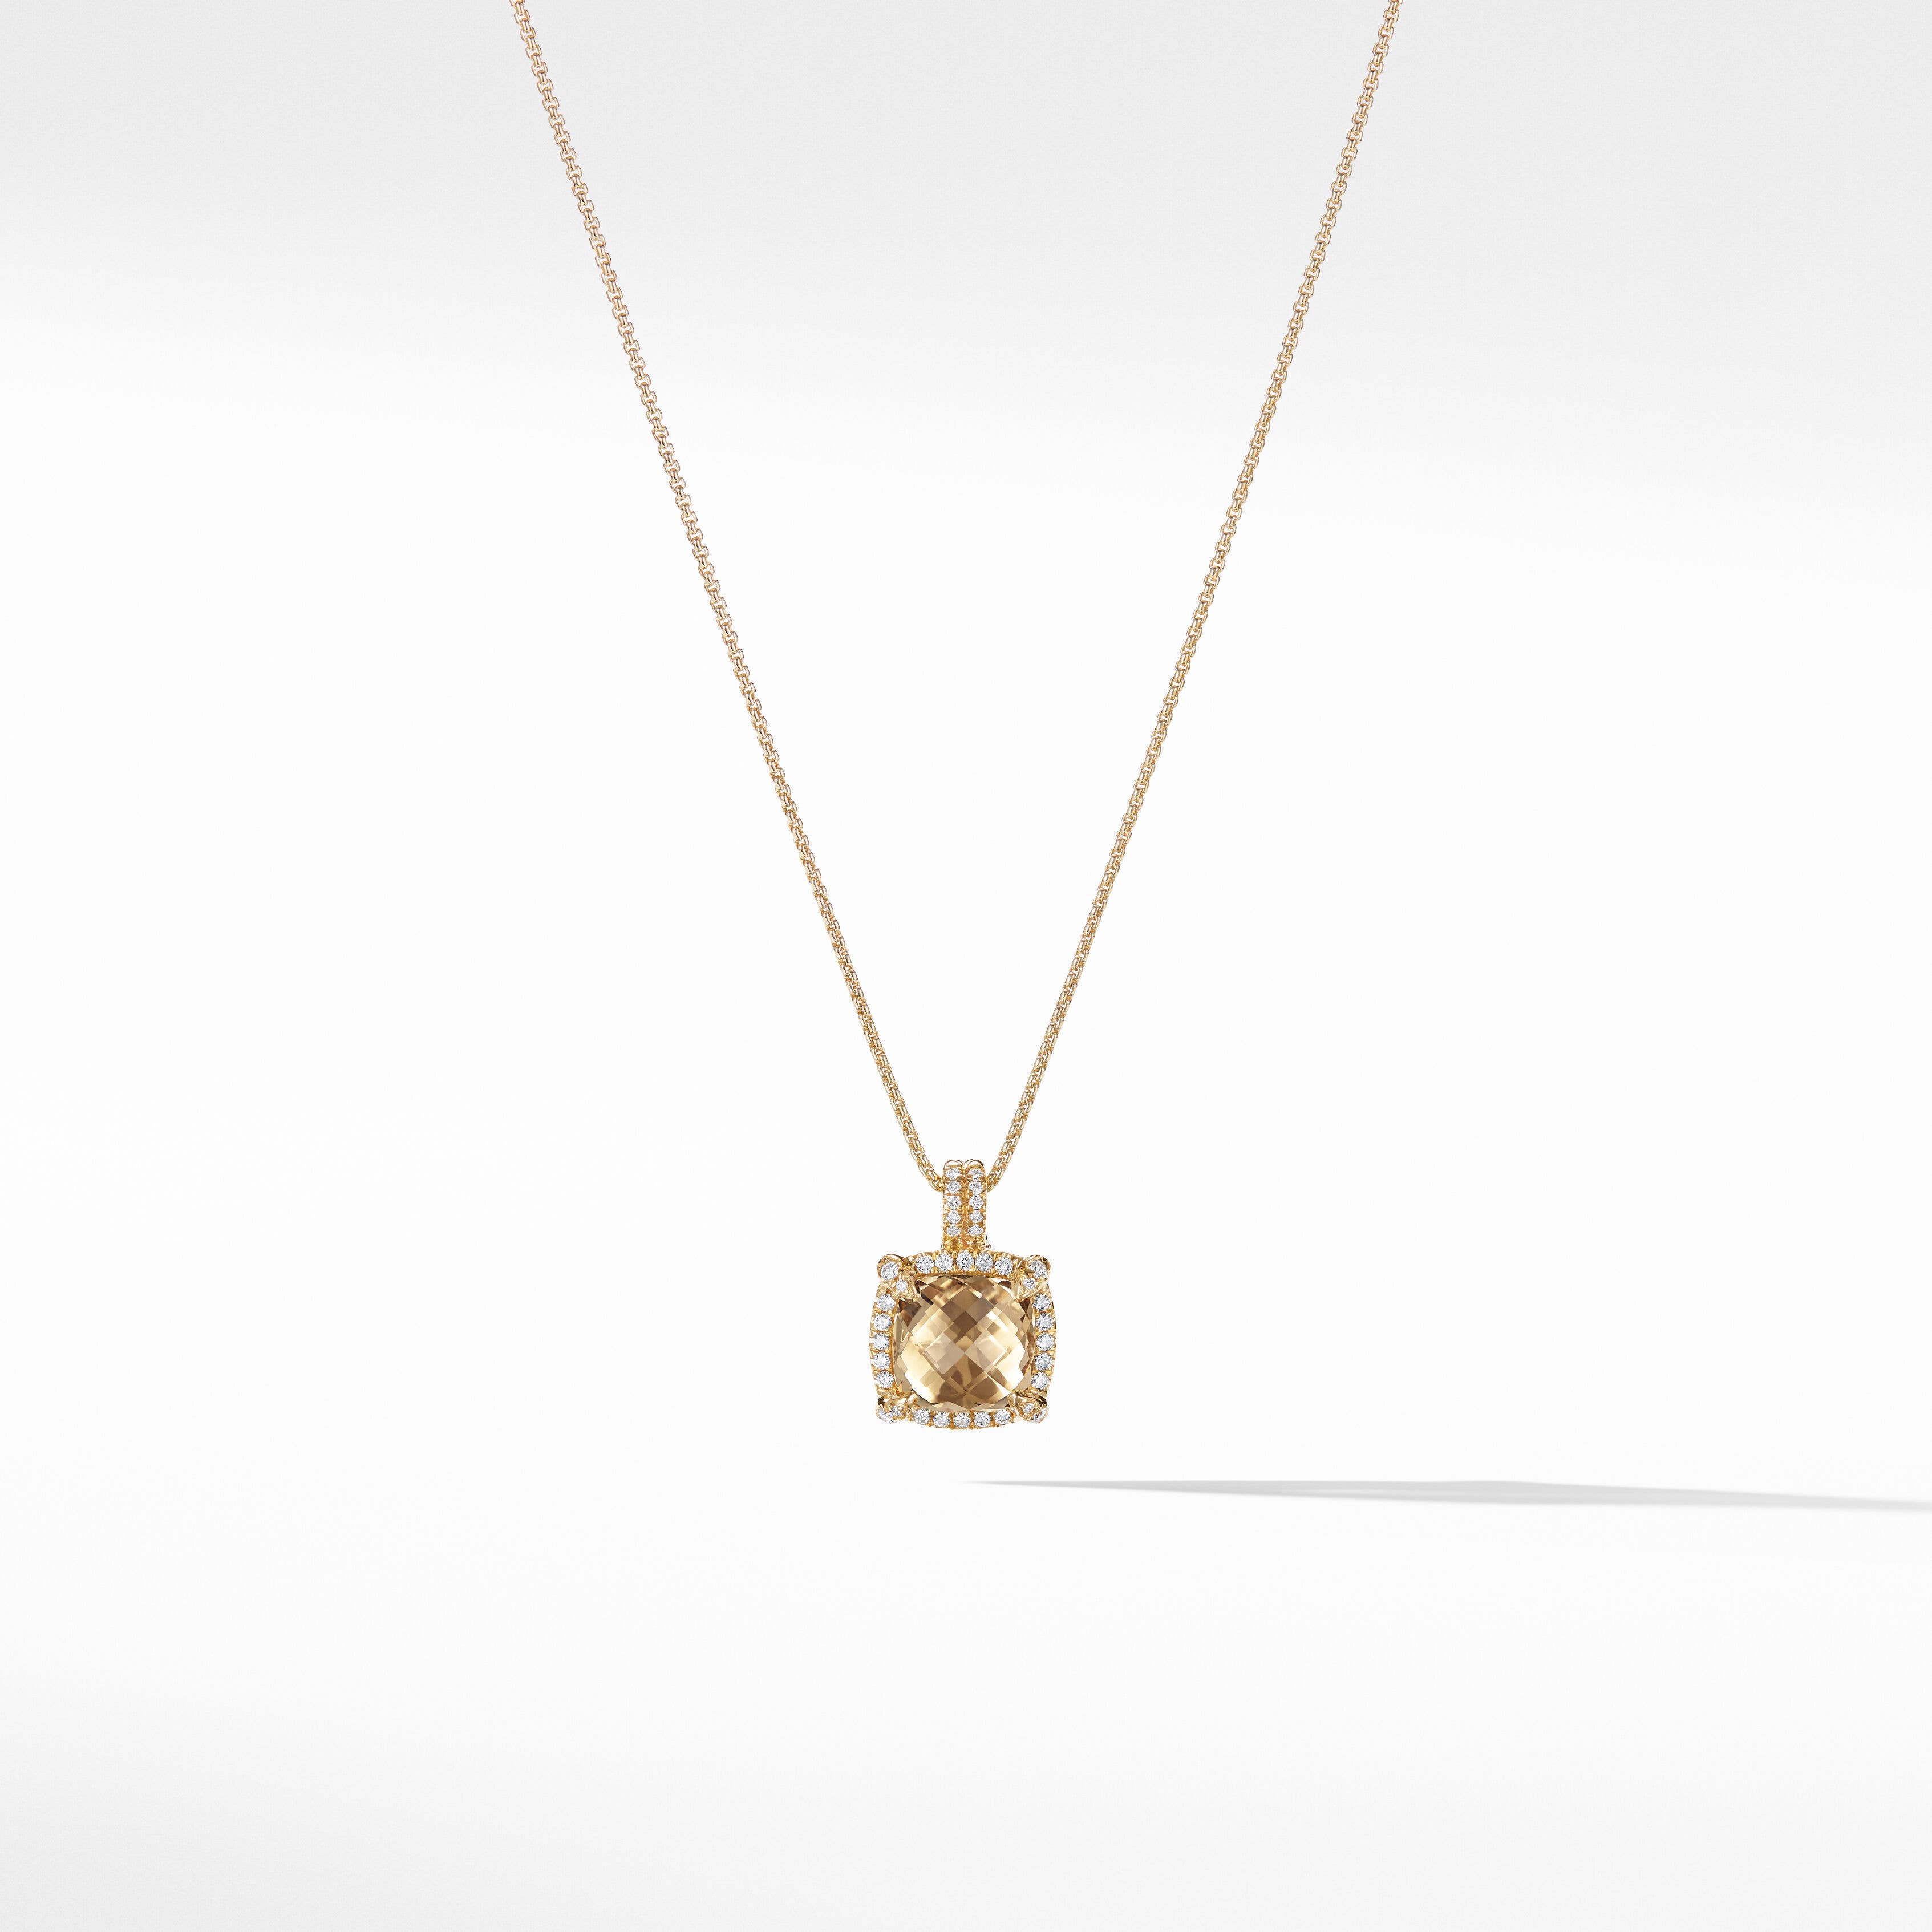 Chatelaine® Pavé Bezel Pendant Necklace in 18K Yellow Gold with Champagne Citrine and Diamonds